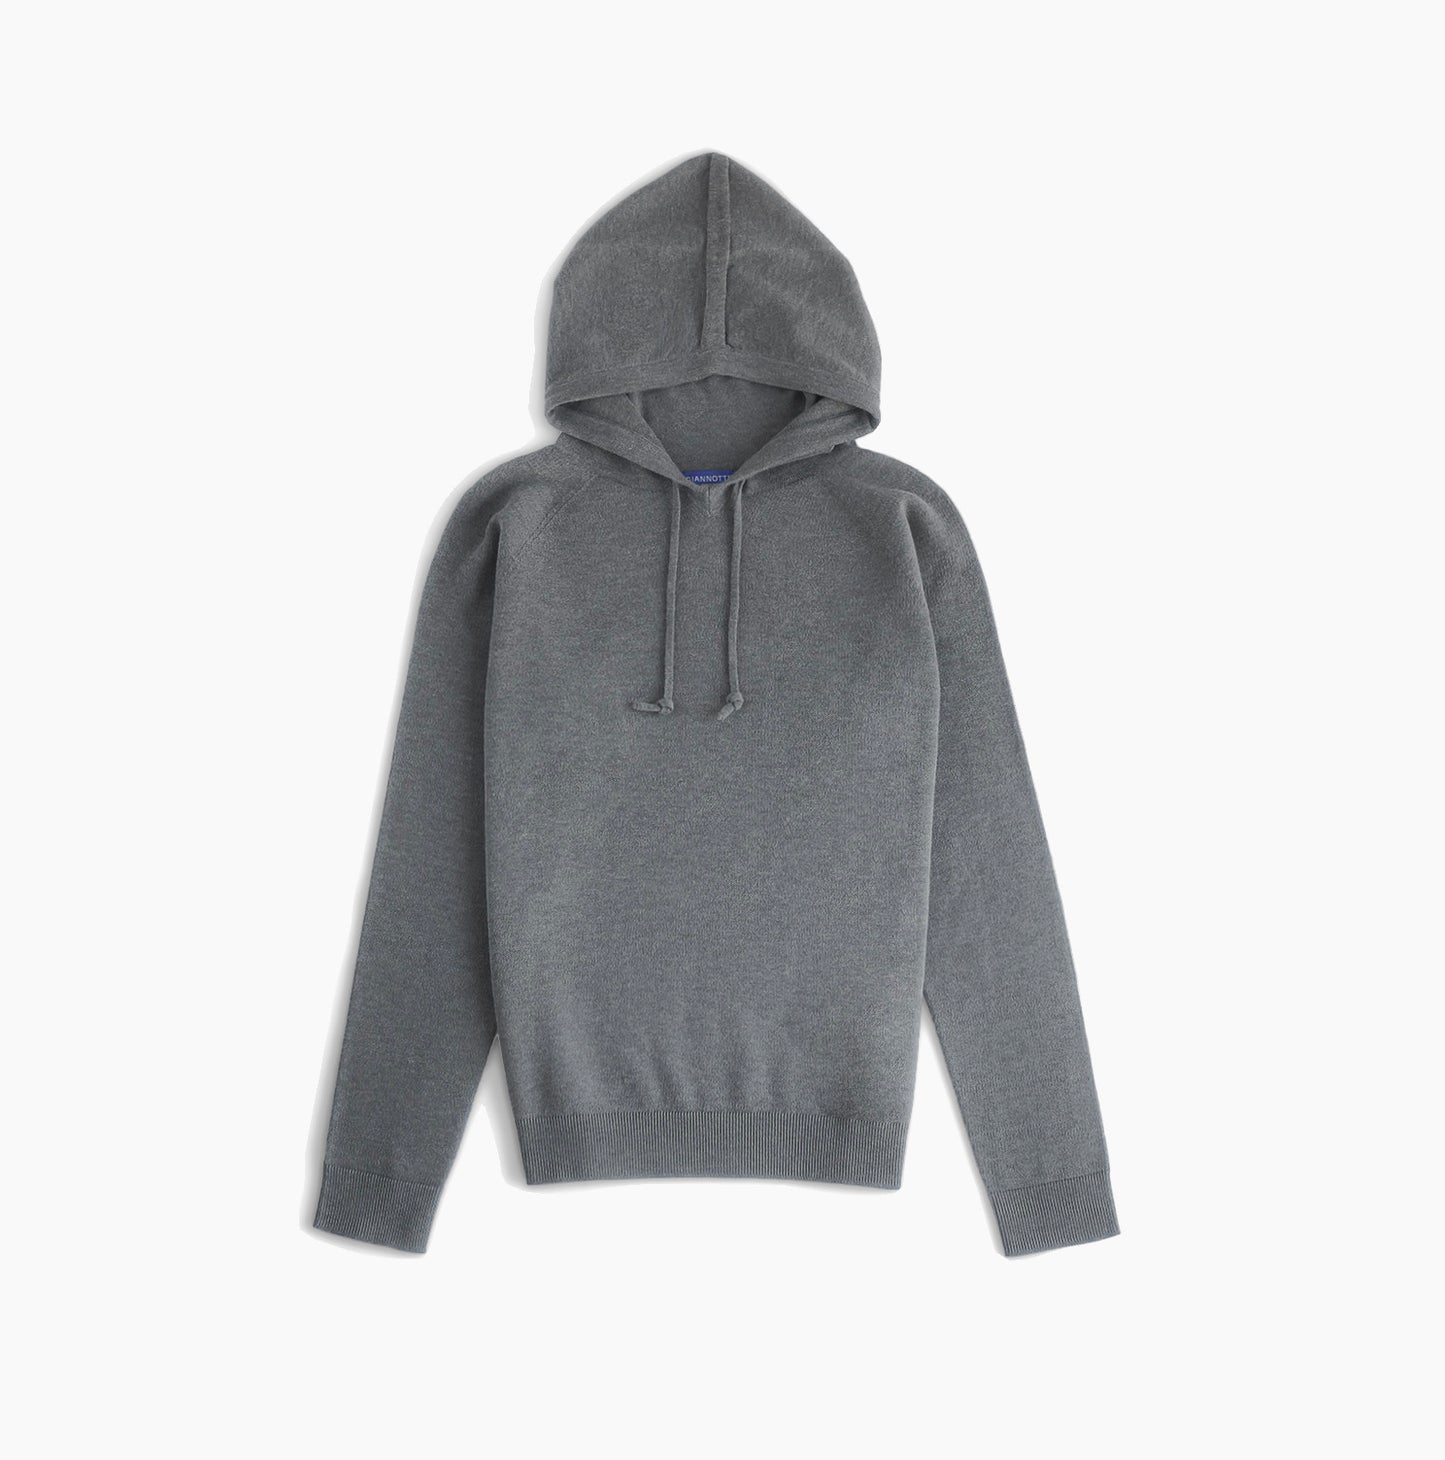 The Soft WarmBrew Knit Hoodie